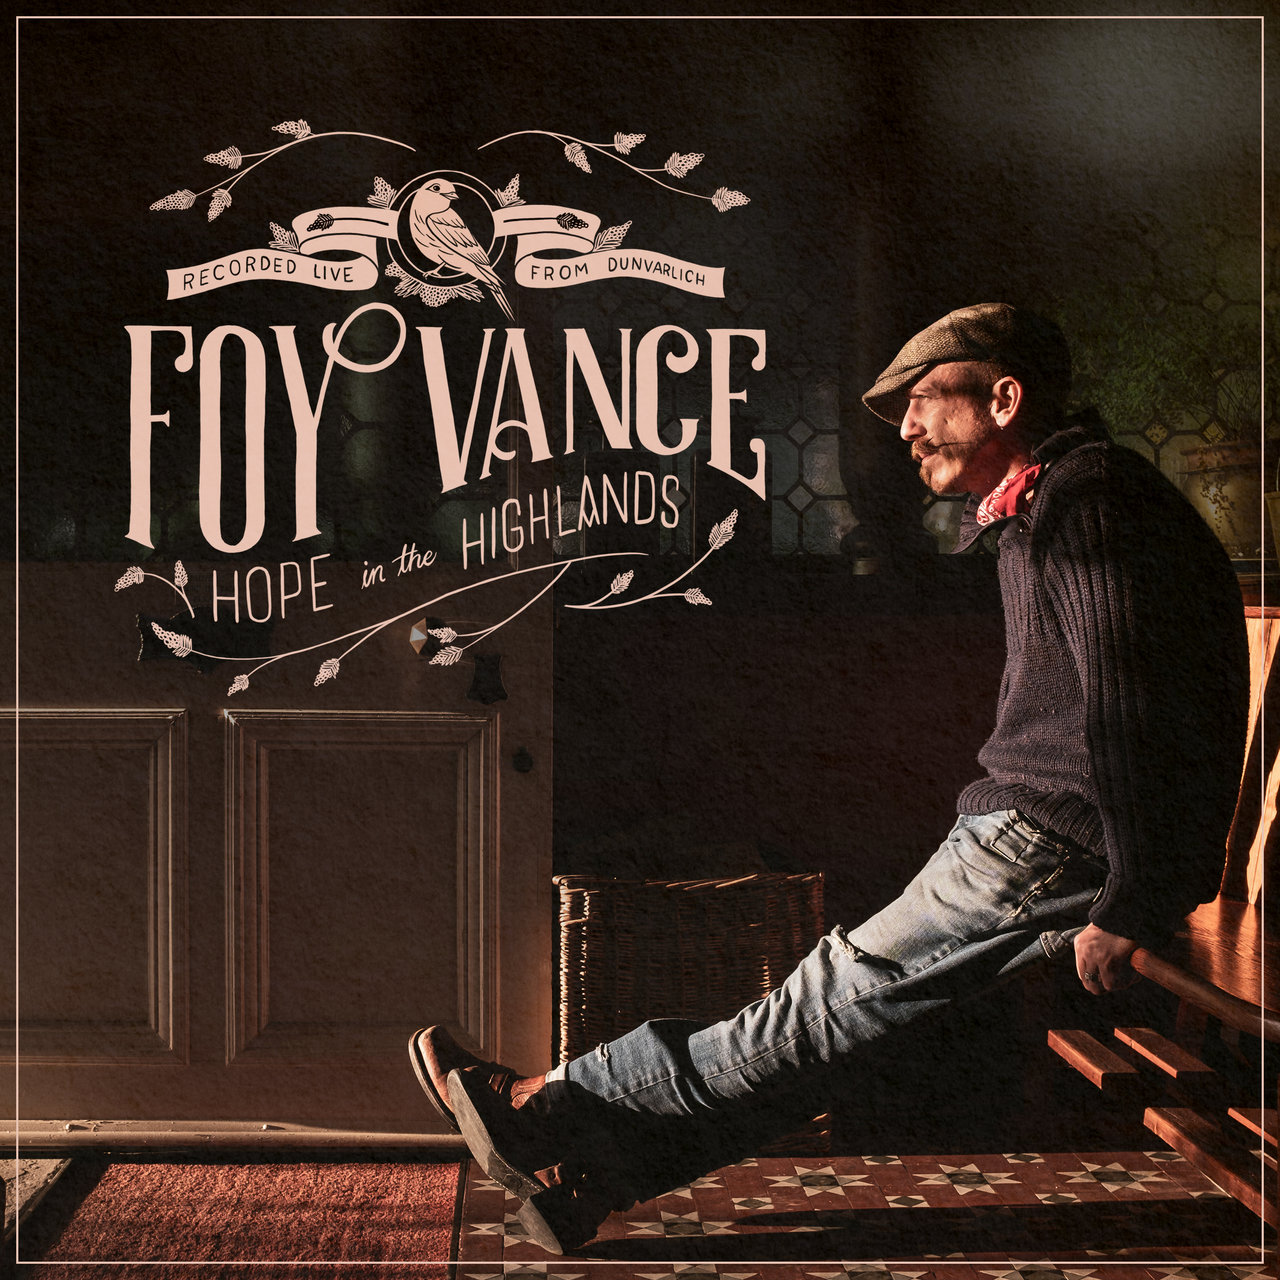 Foy Vance - Hope in The Highlands: Recorded Live From Dunvarli (2020) [FLAC 24bit/48kHz]